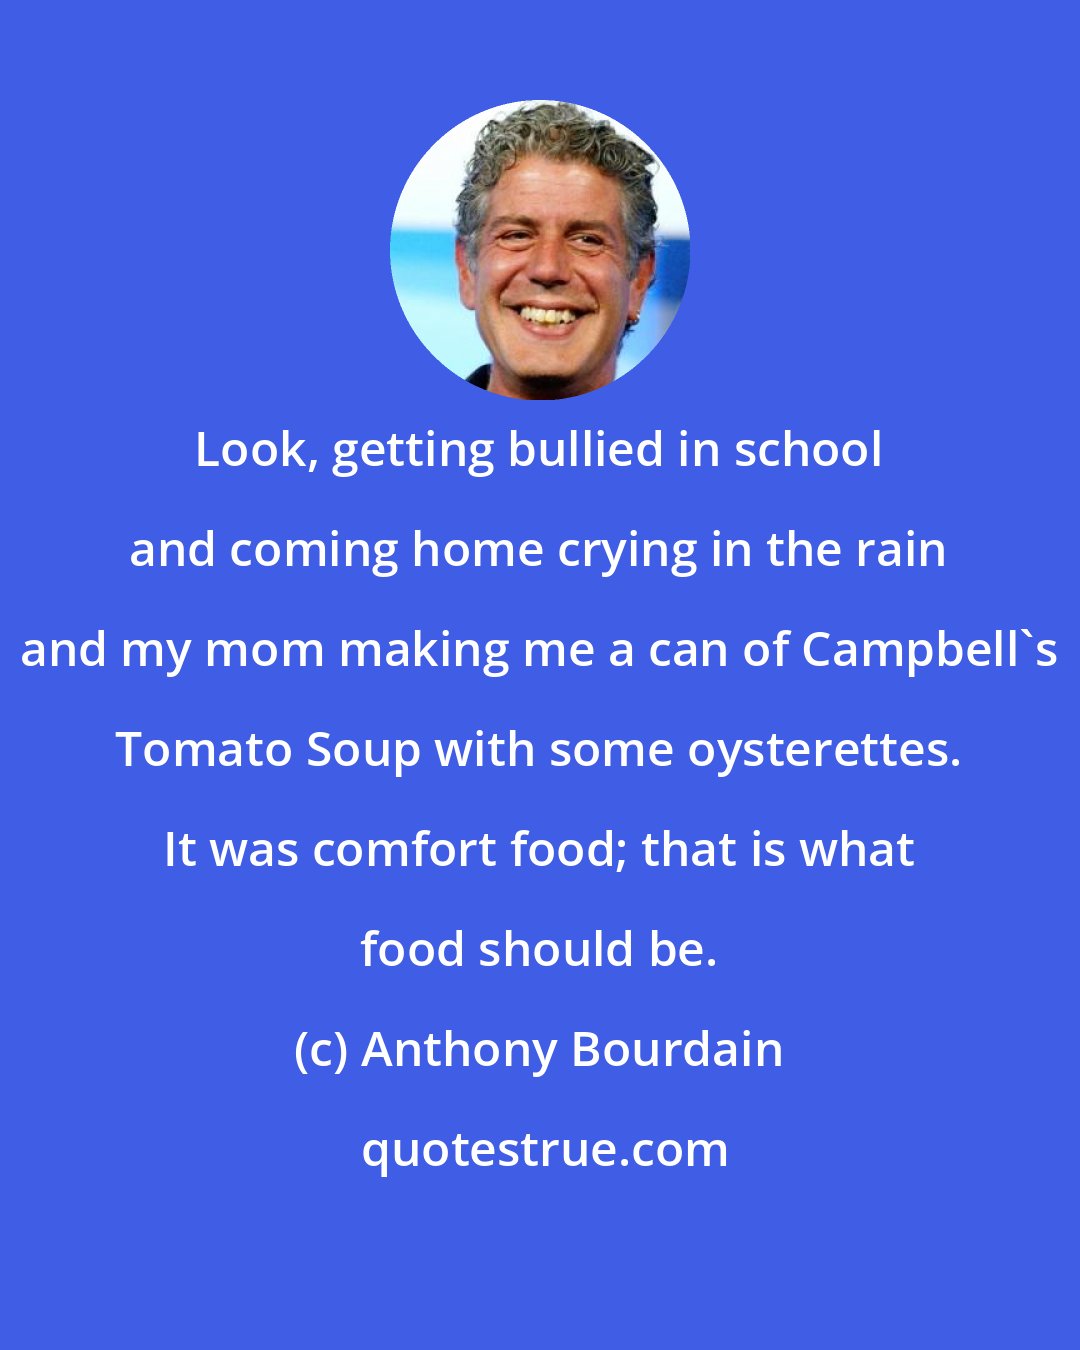 Anthony Bourdain: Look, getting bullied in school and coming home crying in the rain and my mom making me a can of Campbell's Tomato Soup with some oysterettes. It was comfort food; that is what food should be.